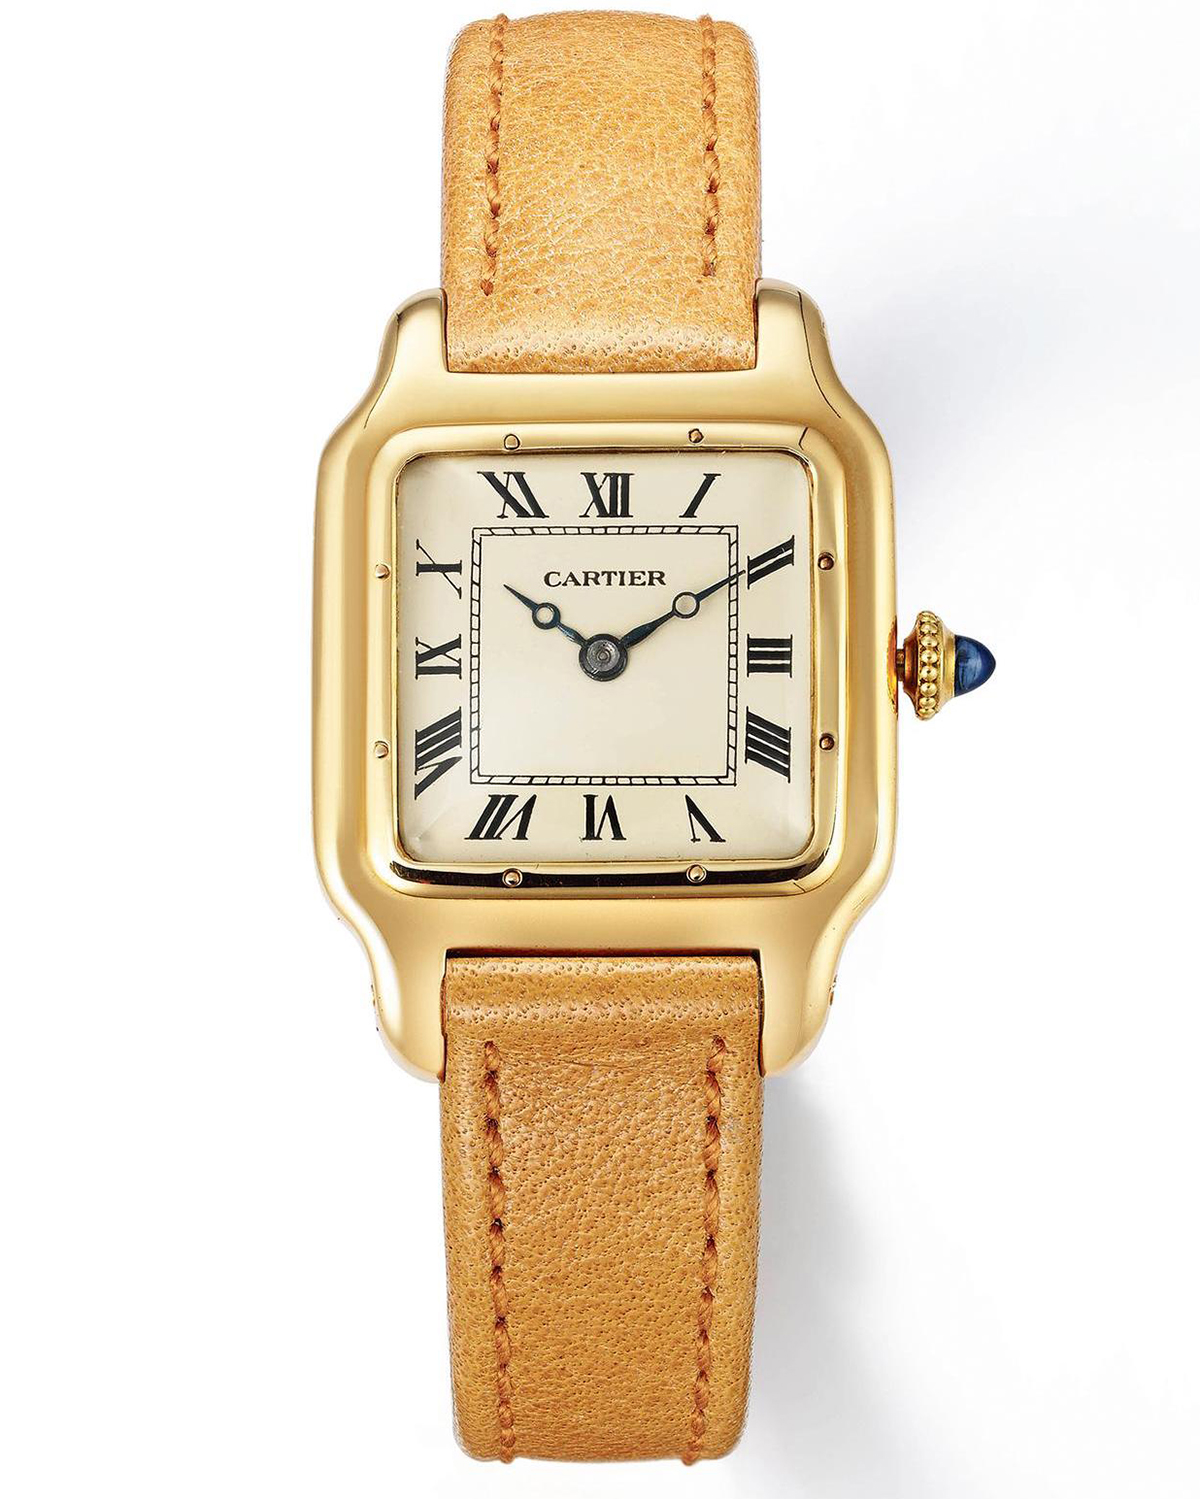 In 1904, Louis Cartier created the first watch specially designed to be worn on the wrist for his friend, aviator Alberto Santos-Dumont. Shown here is an early yellow gold model (circa 1915).